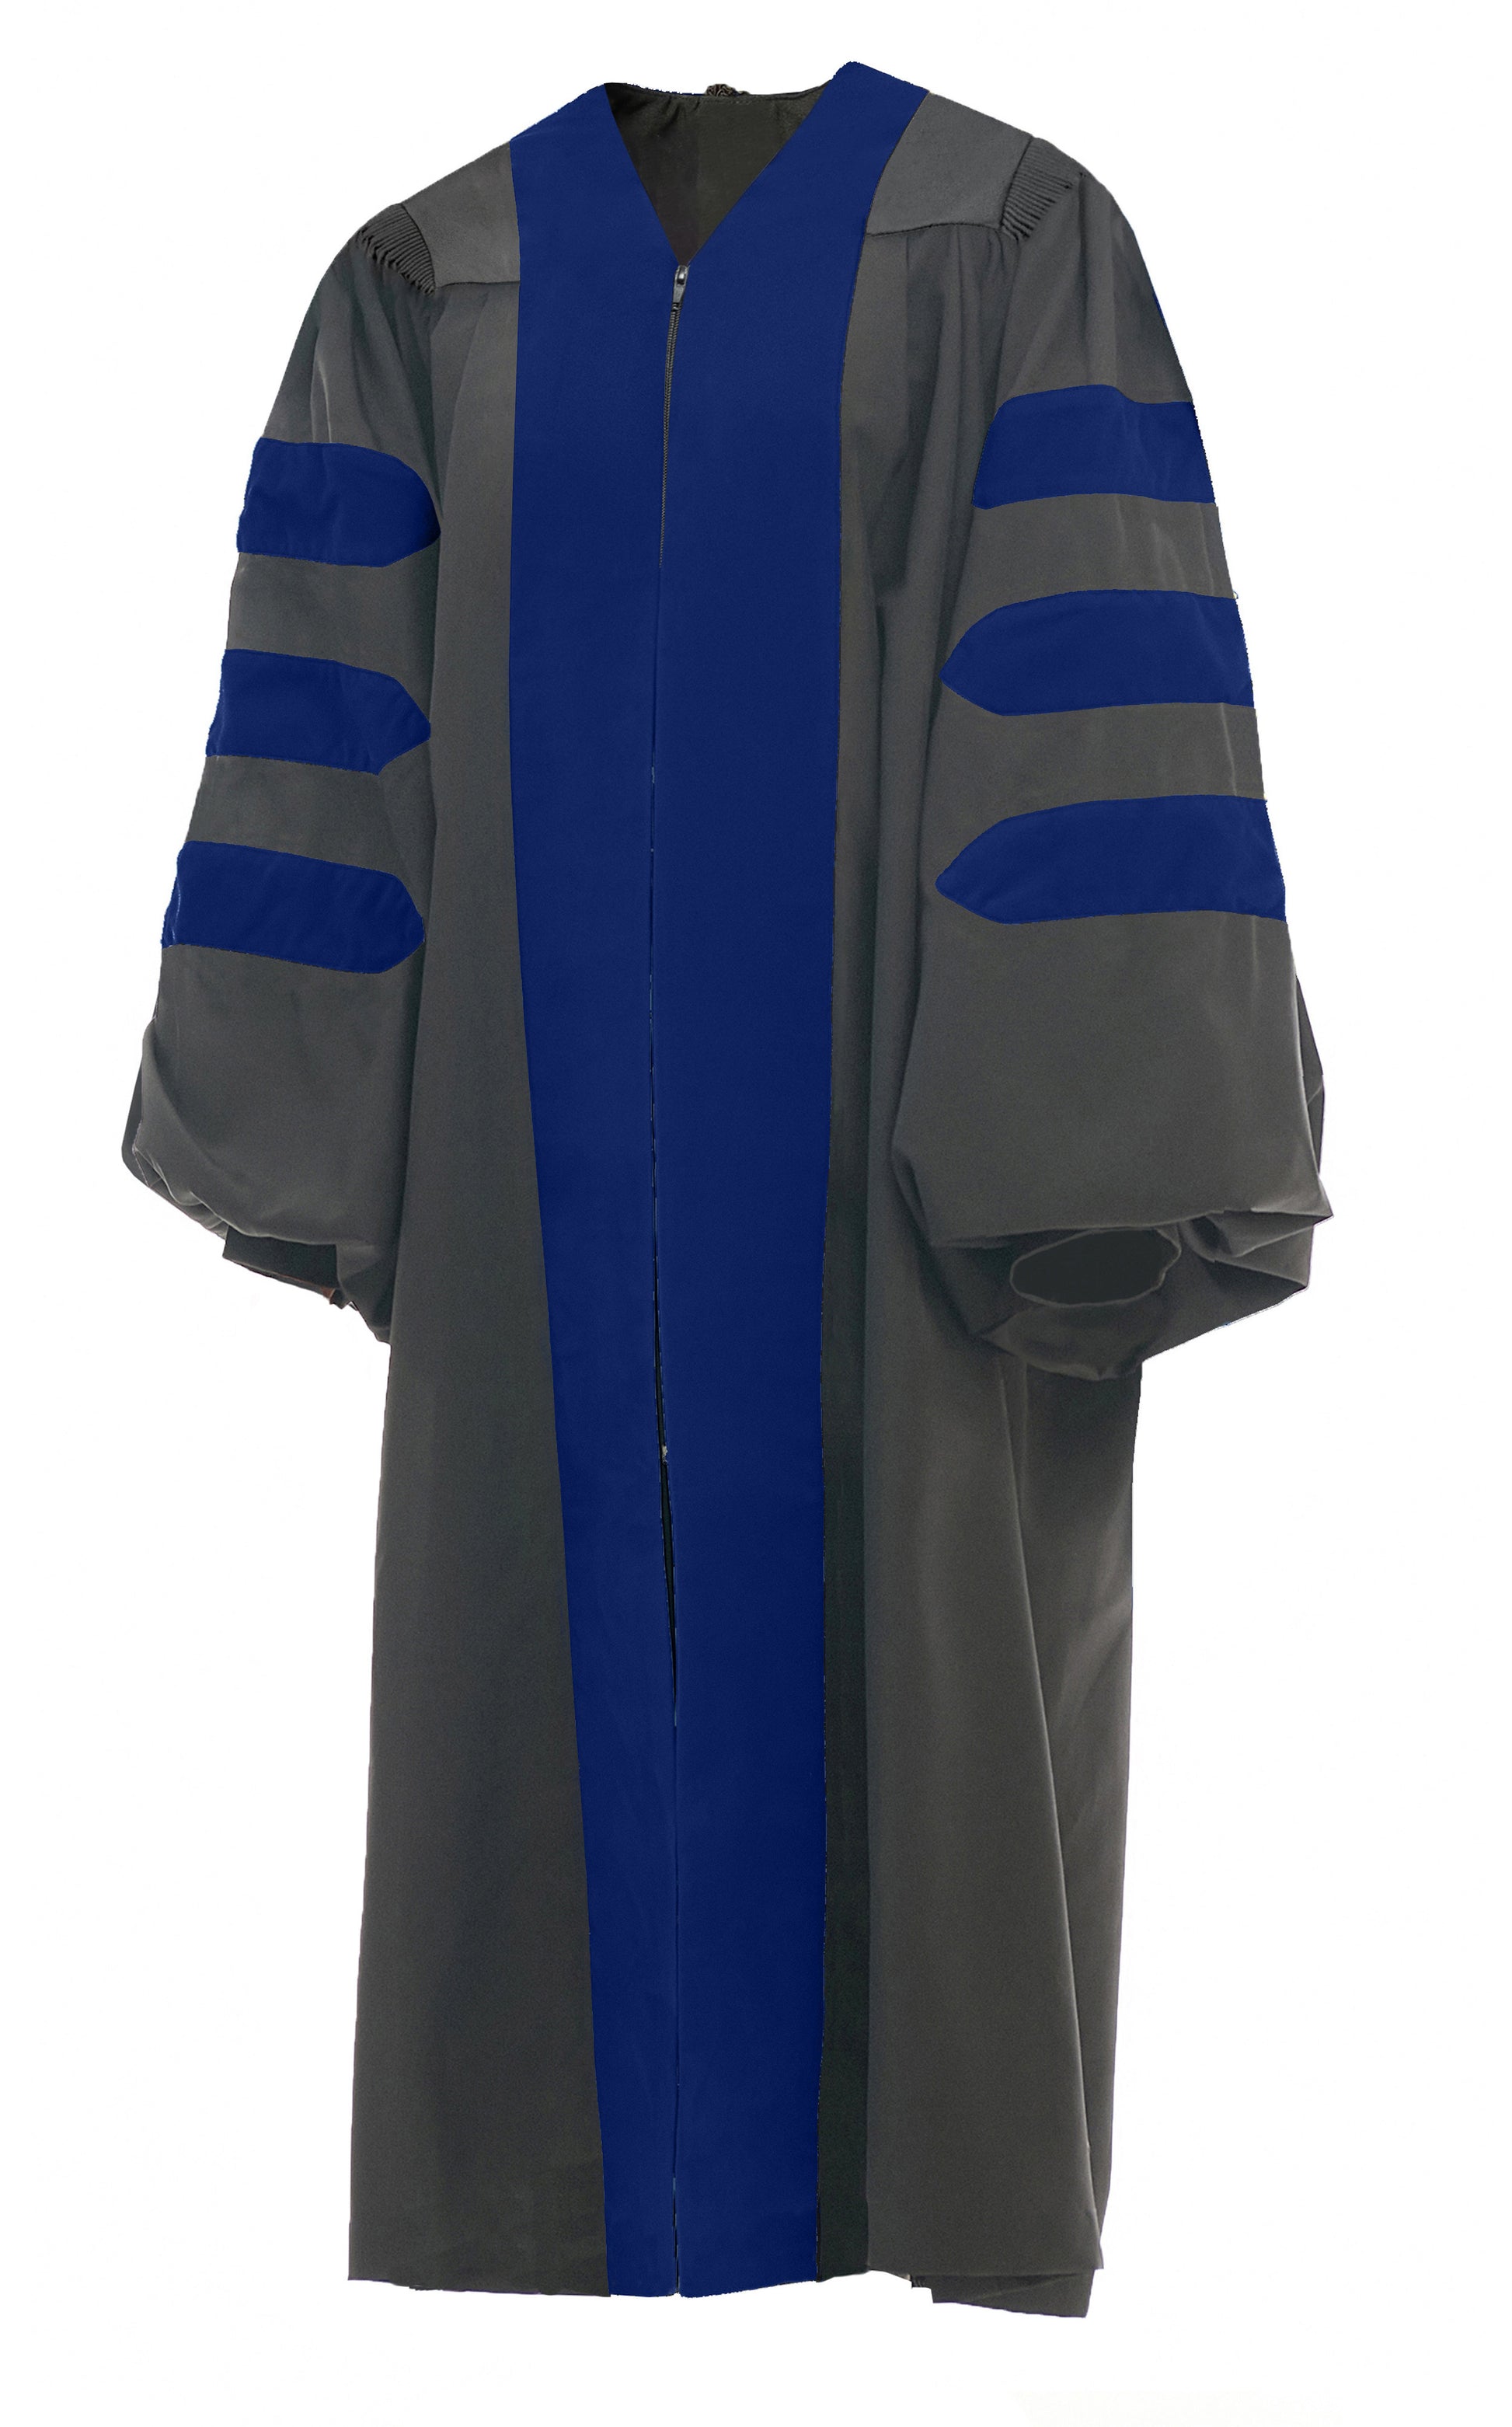 Deluxe Doctoral/PhD Graduation Gown